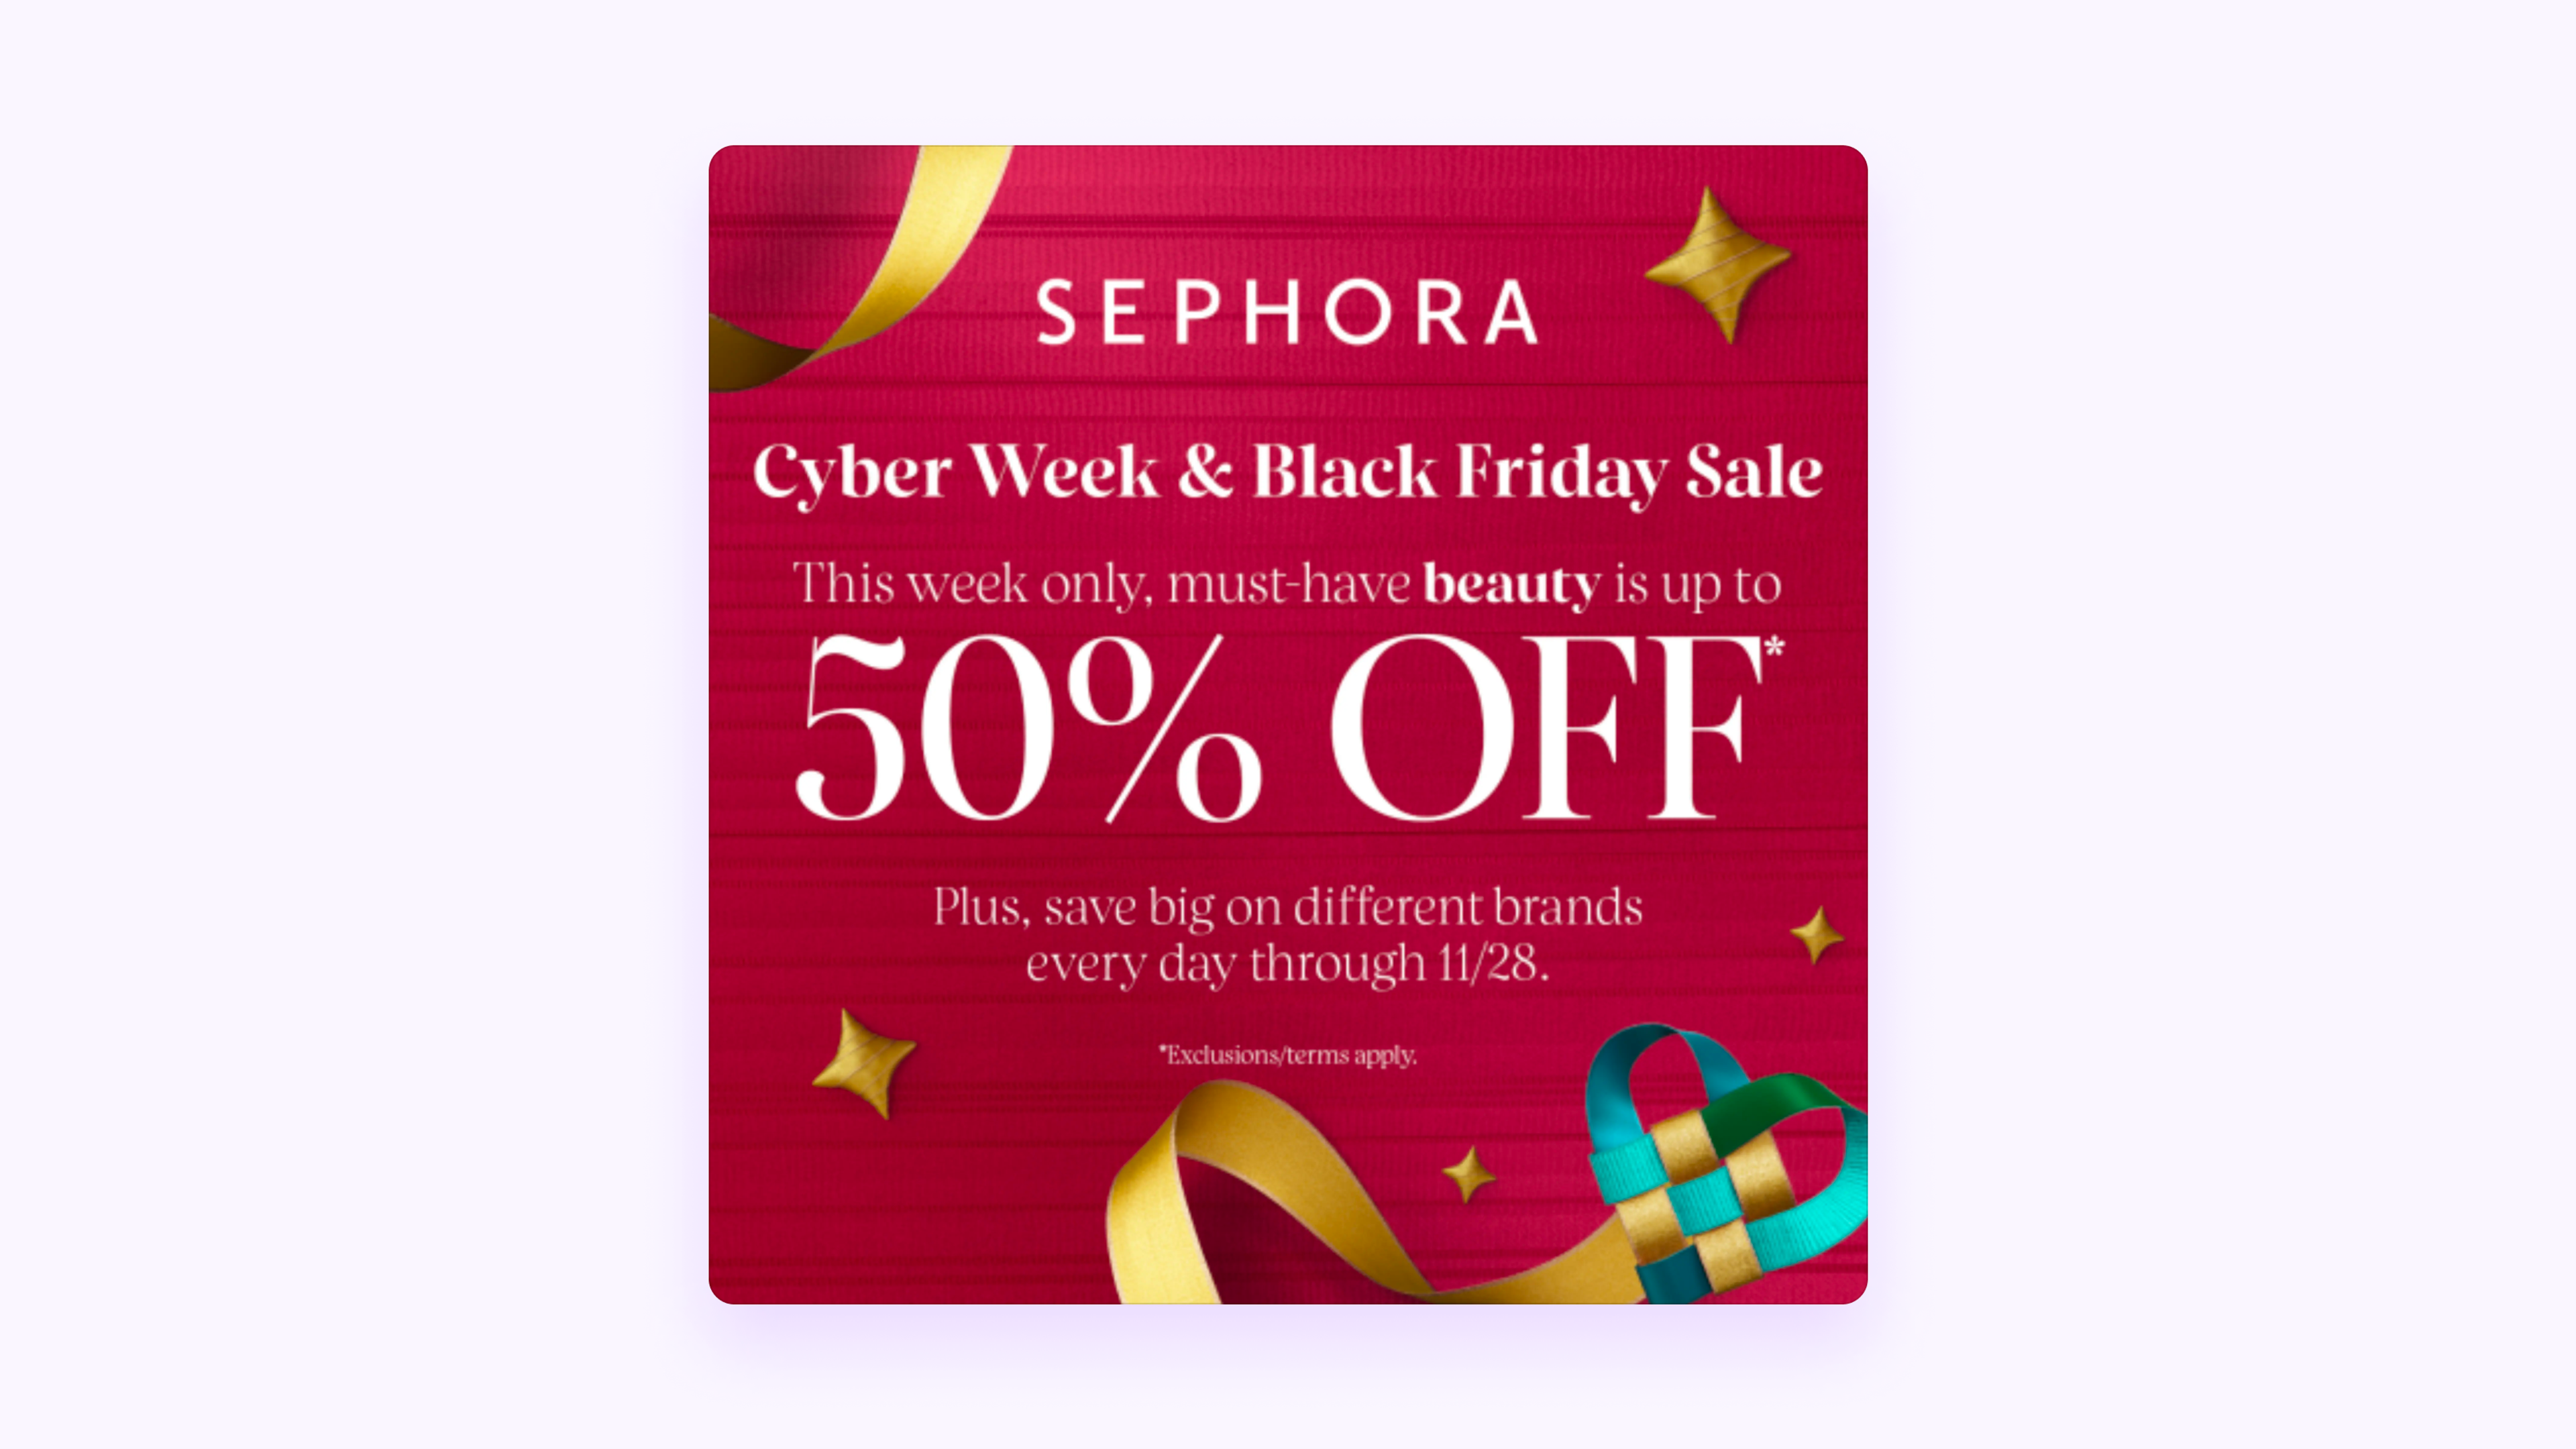 Image depicts Cyber Week & Black Friday Sale from Sephora. Offer is for 50% off select beauty.